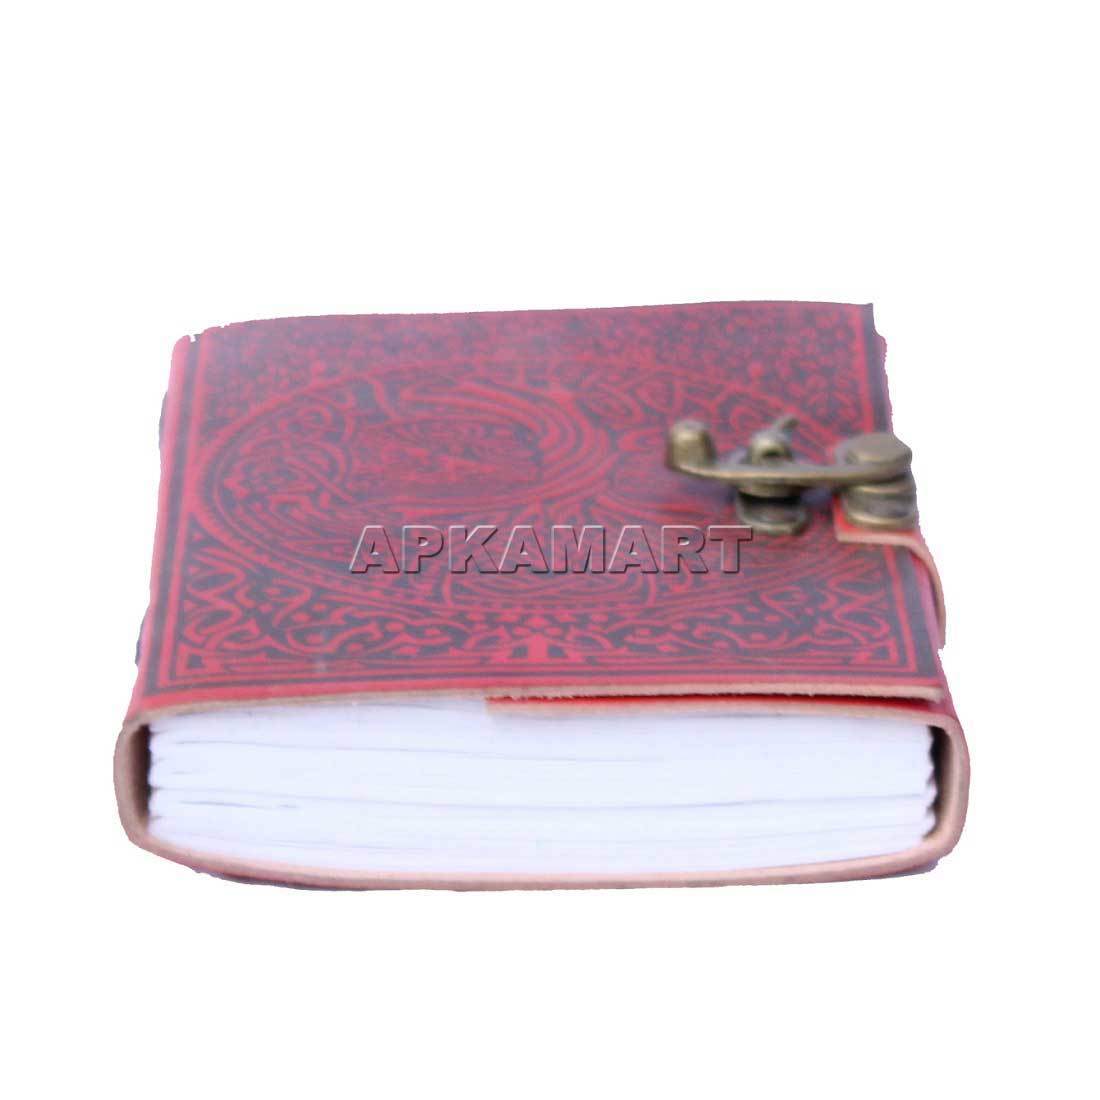 Executive Diary | Planner Diary - For Office work & Gifts - 7 inch - ApkaMart